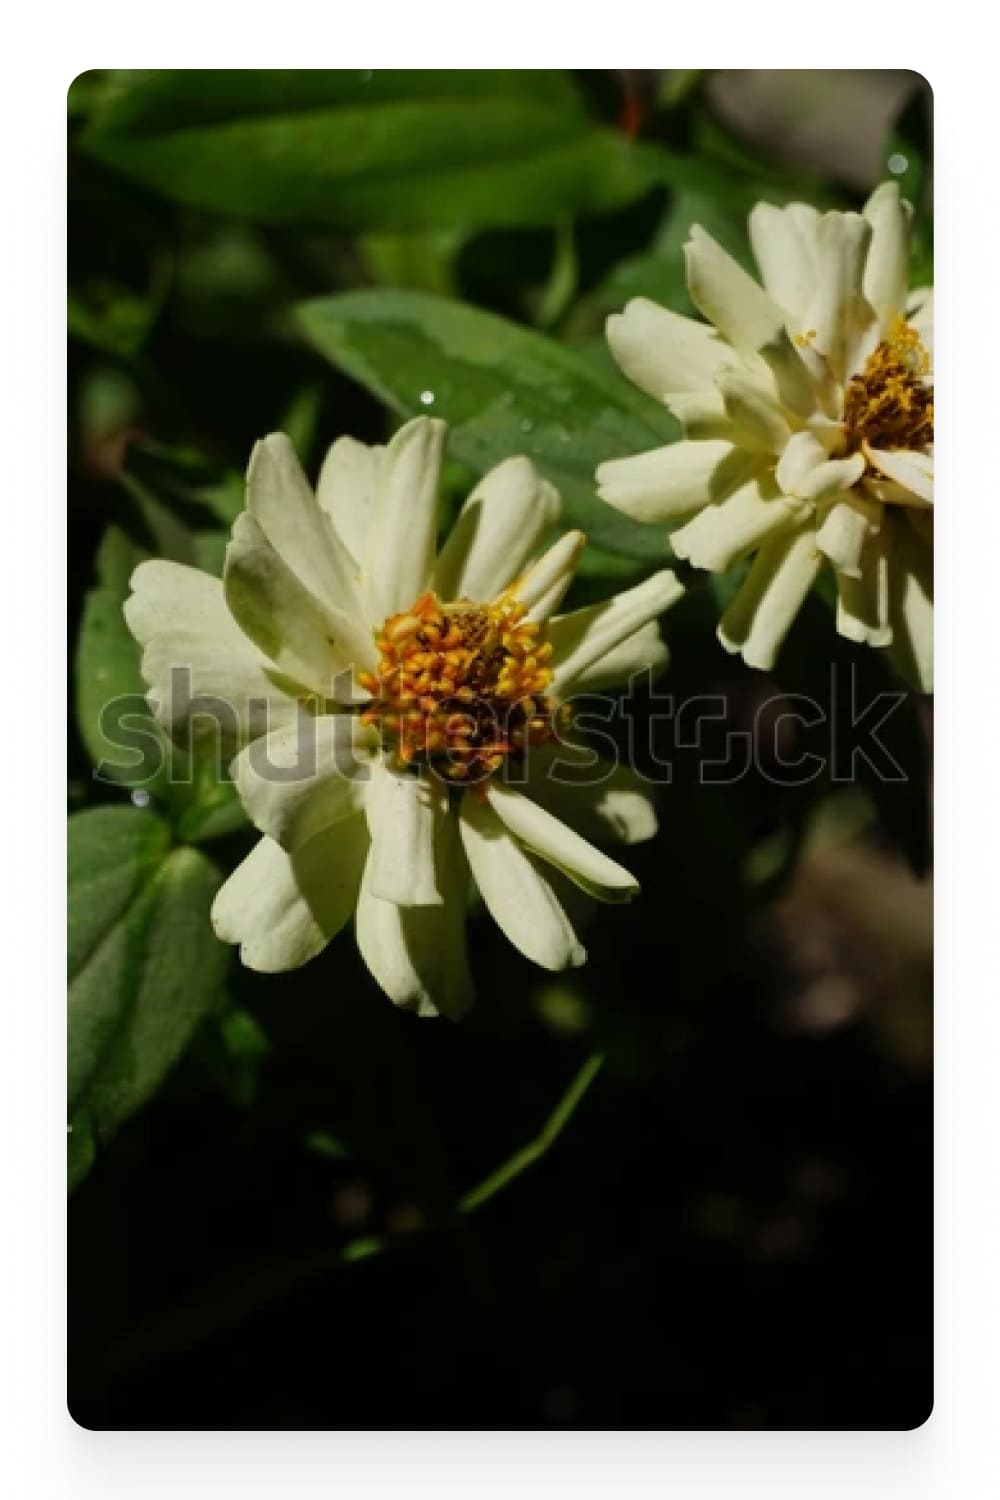 Photograph of two white flowers.